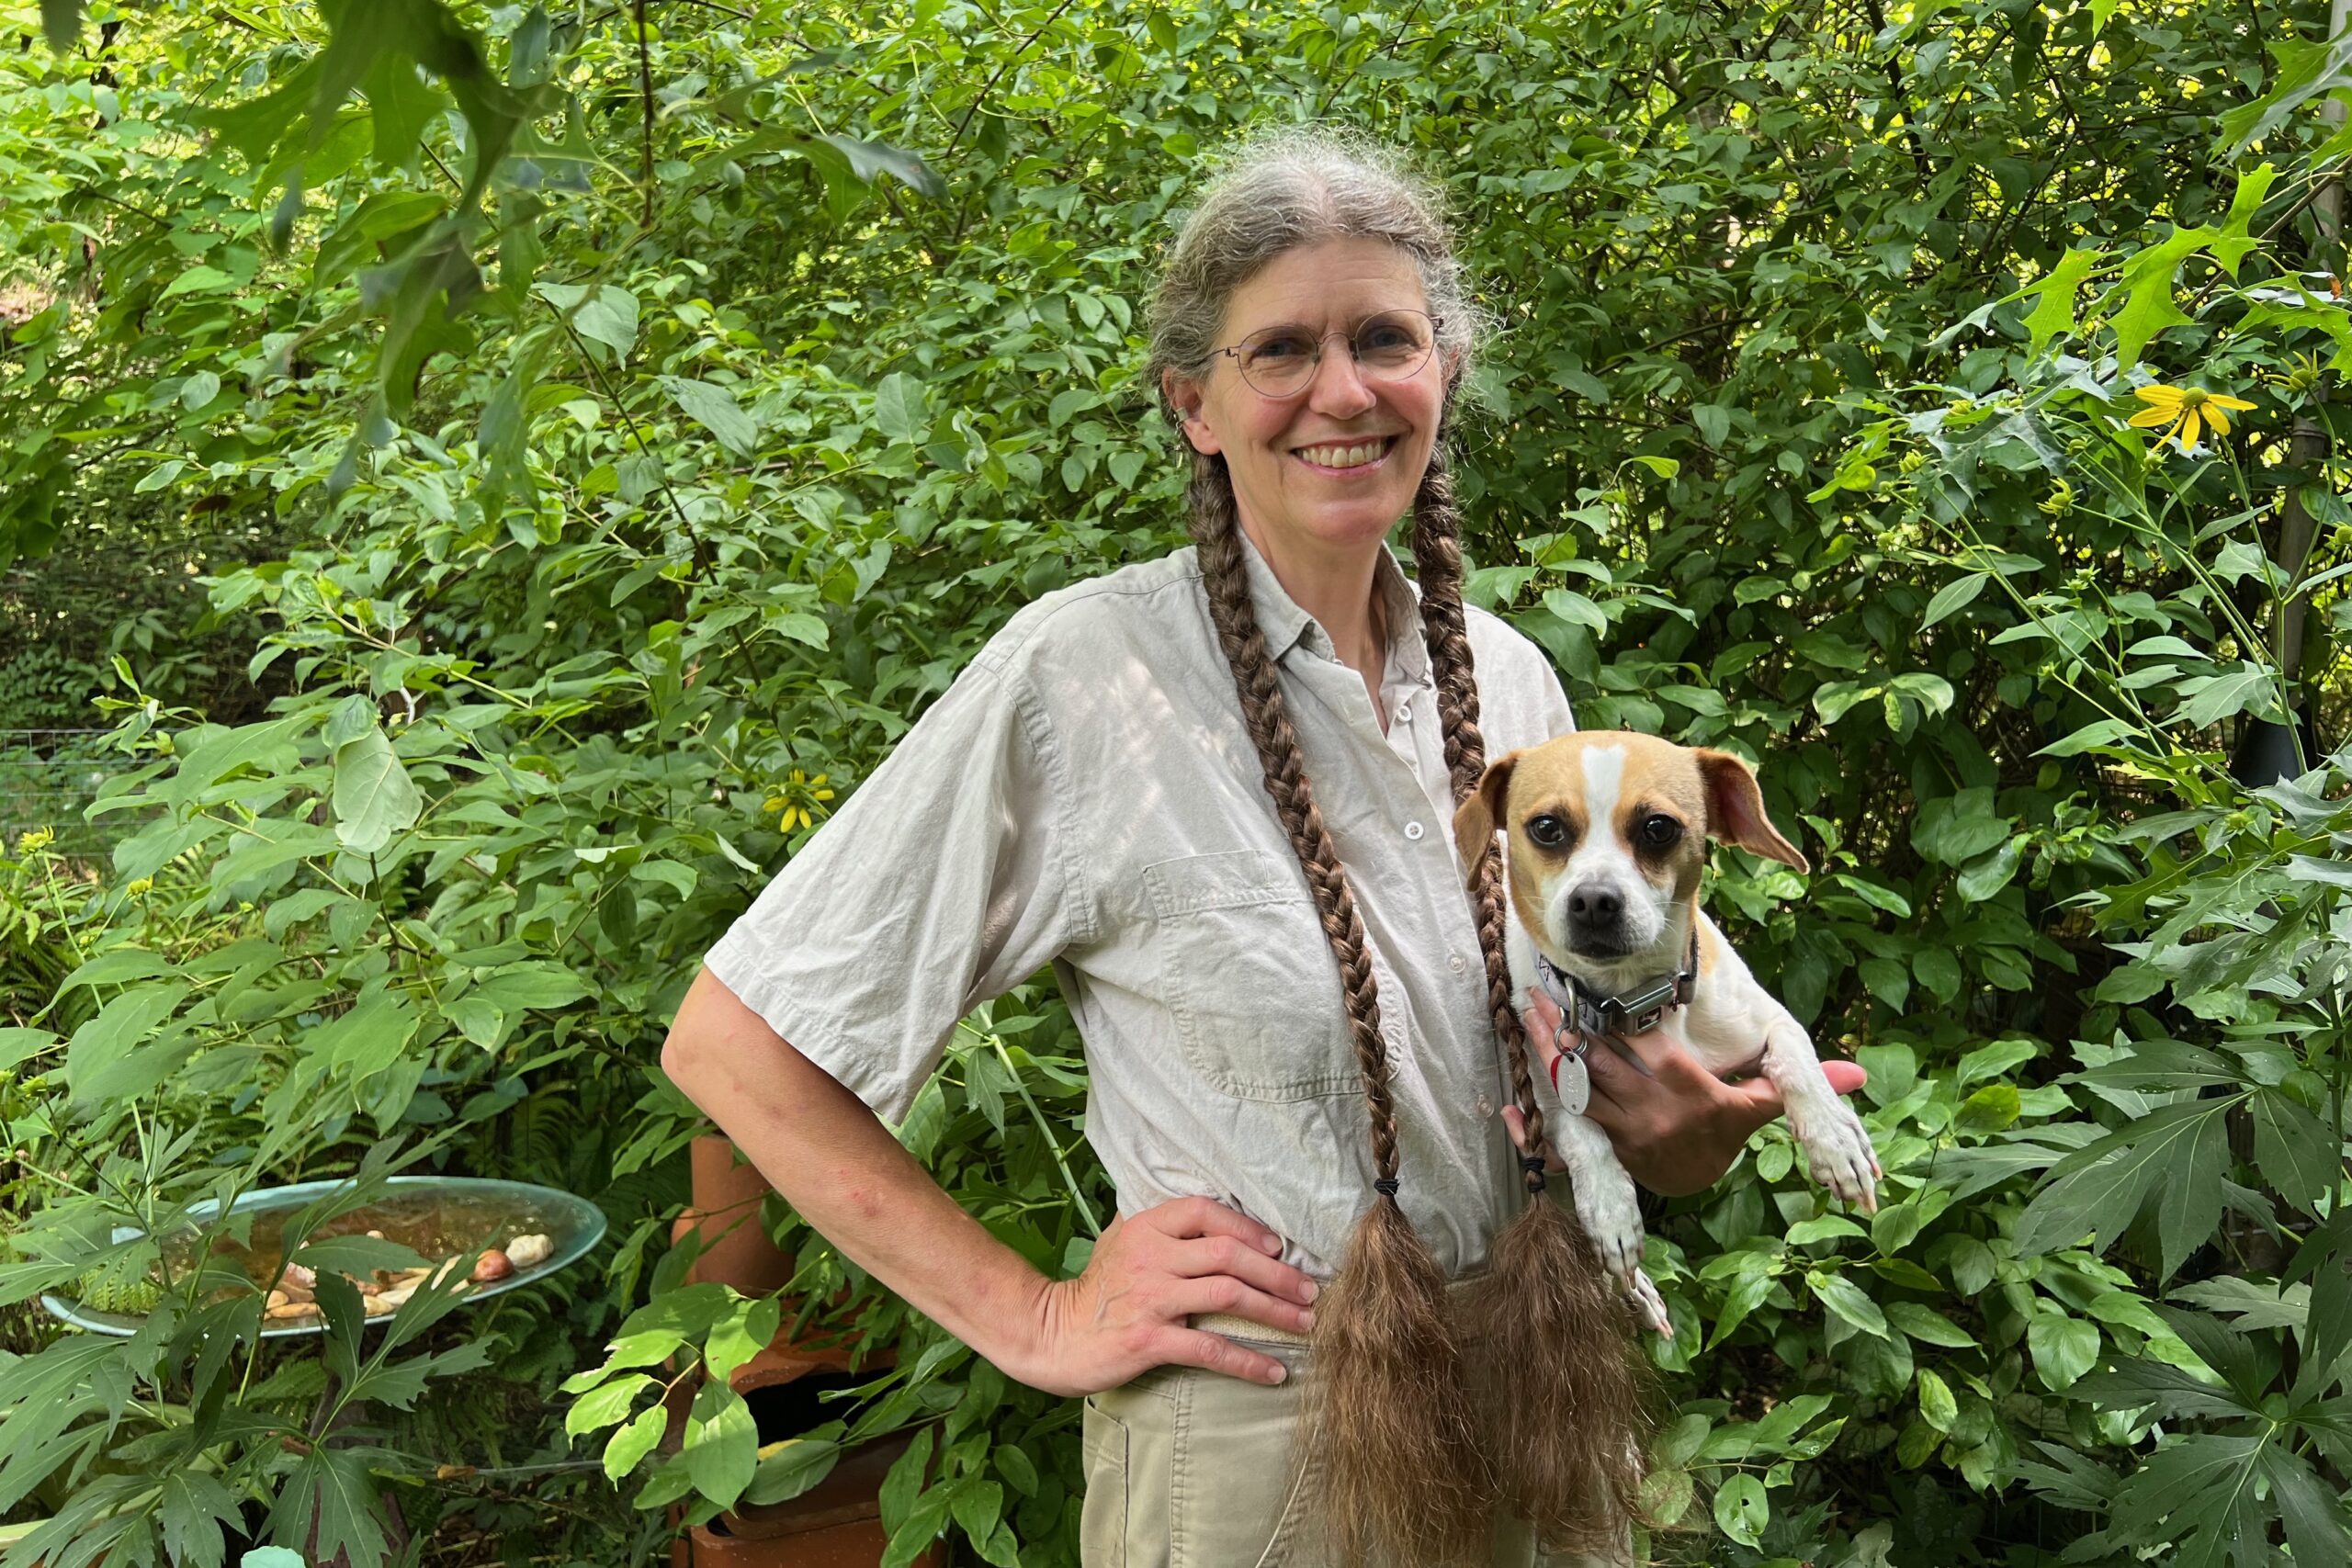 A woman stands with long braids stands holding a dog, with greenery in the background.